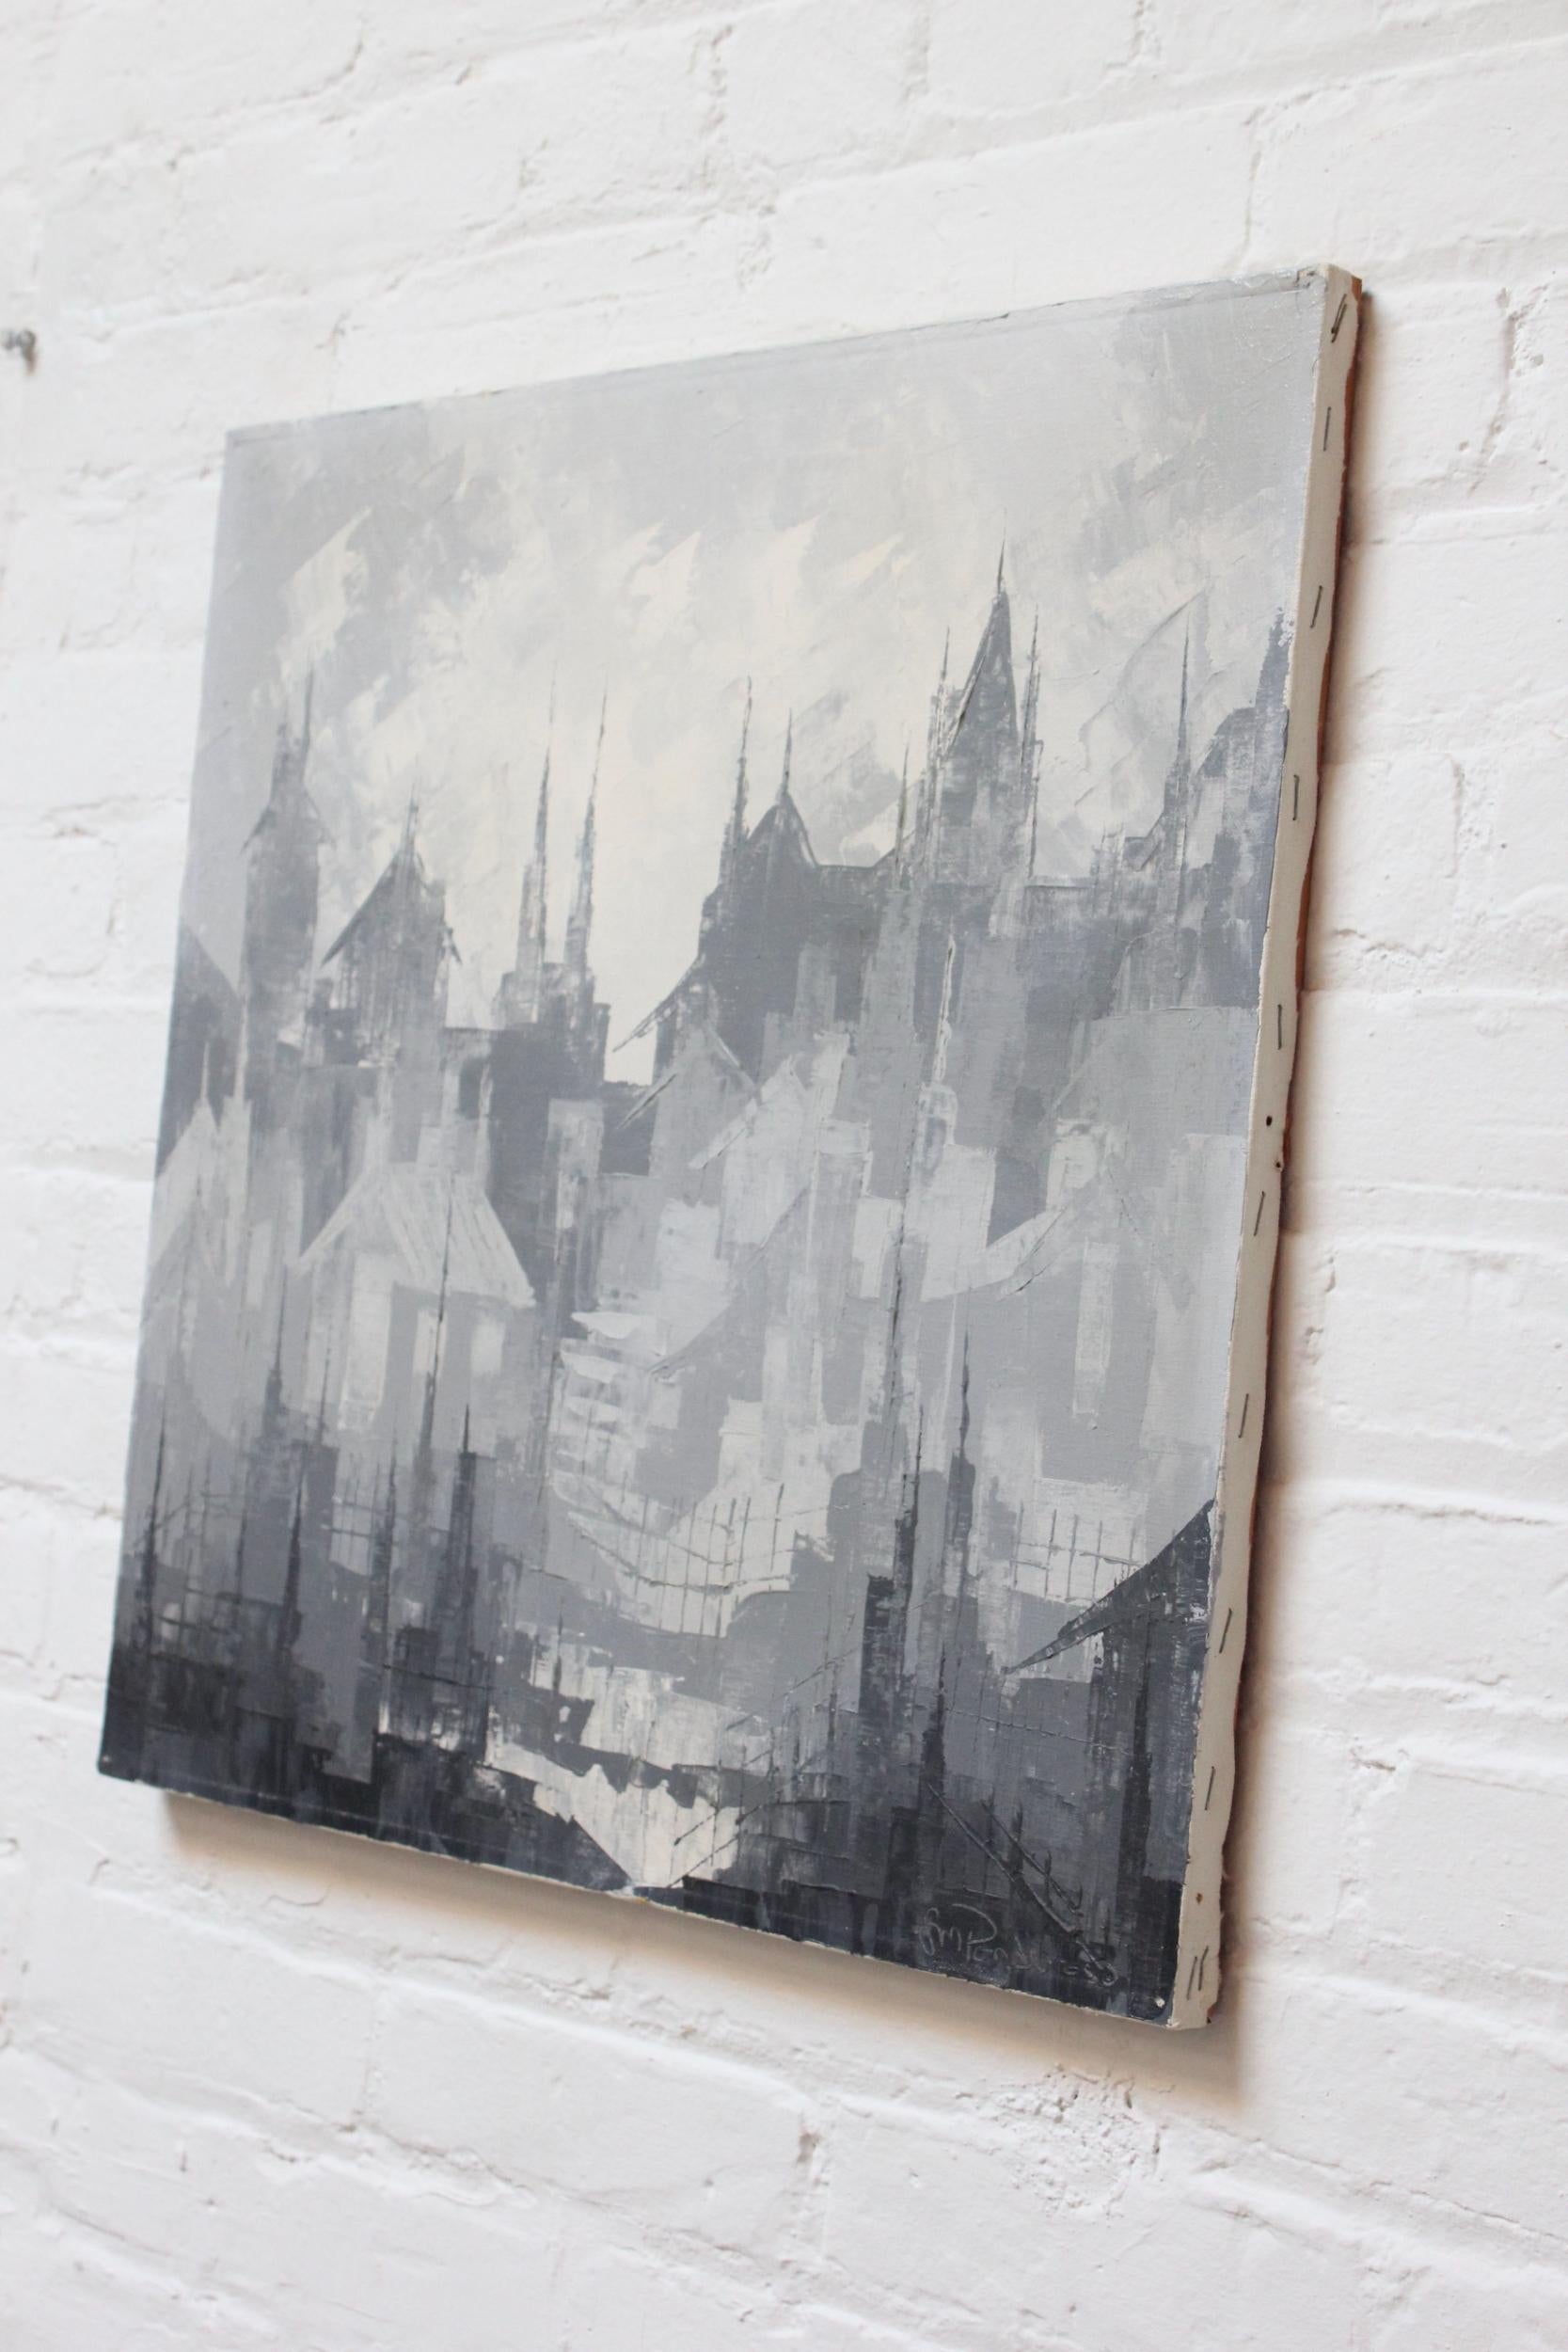 Mid-Century Modern Gray Tonal Abstract Expressionist Oil on Canvas Cityscape by Louis M. Ponderoso For Sale